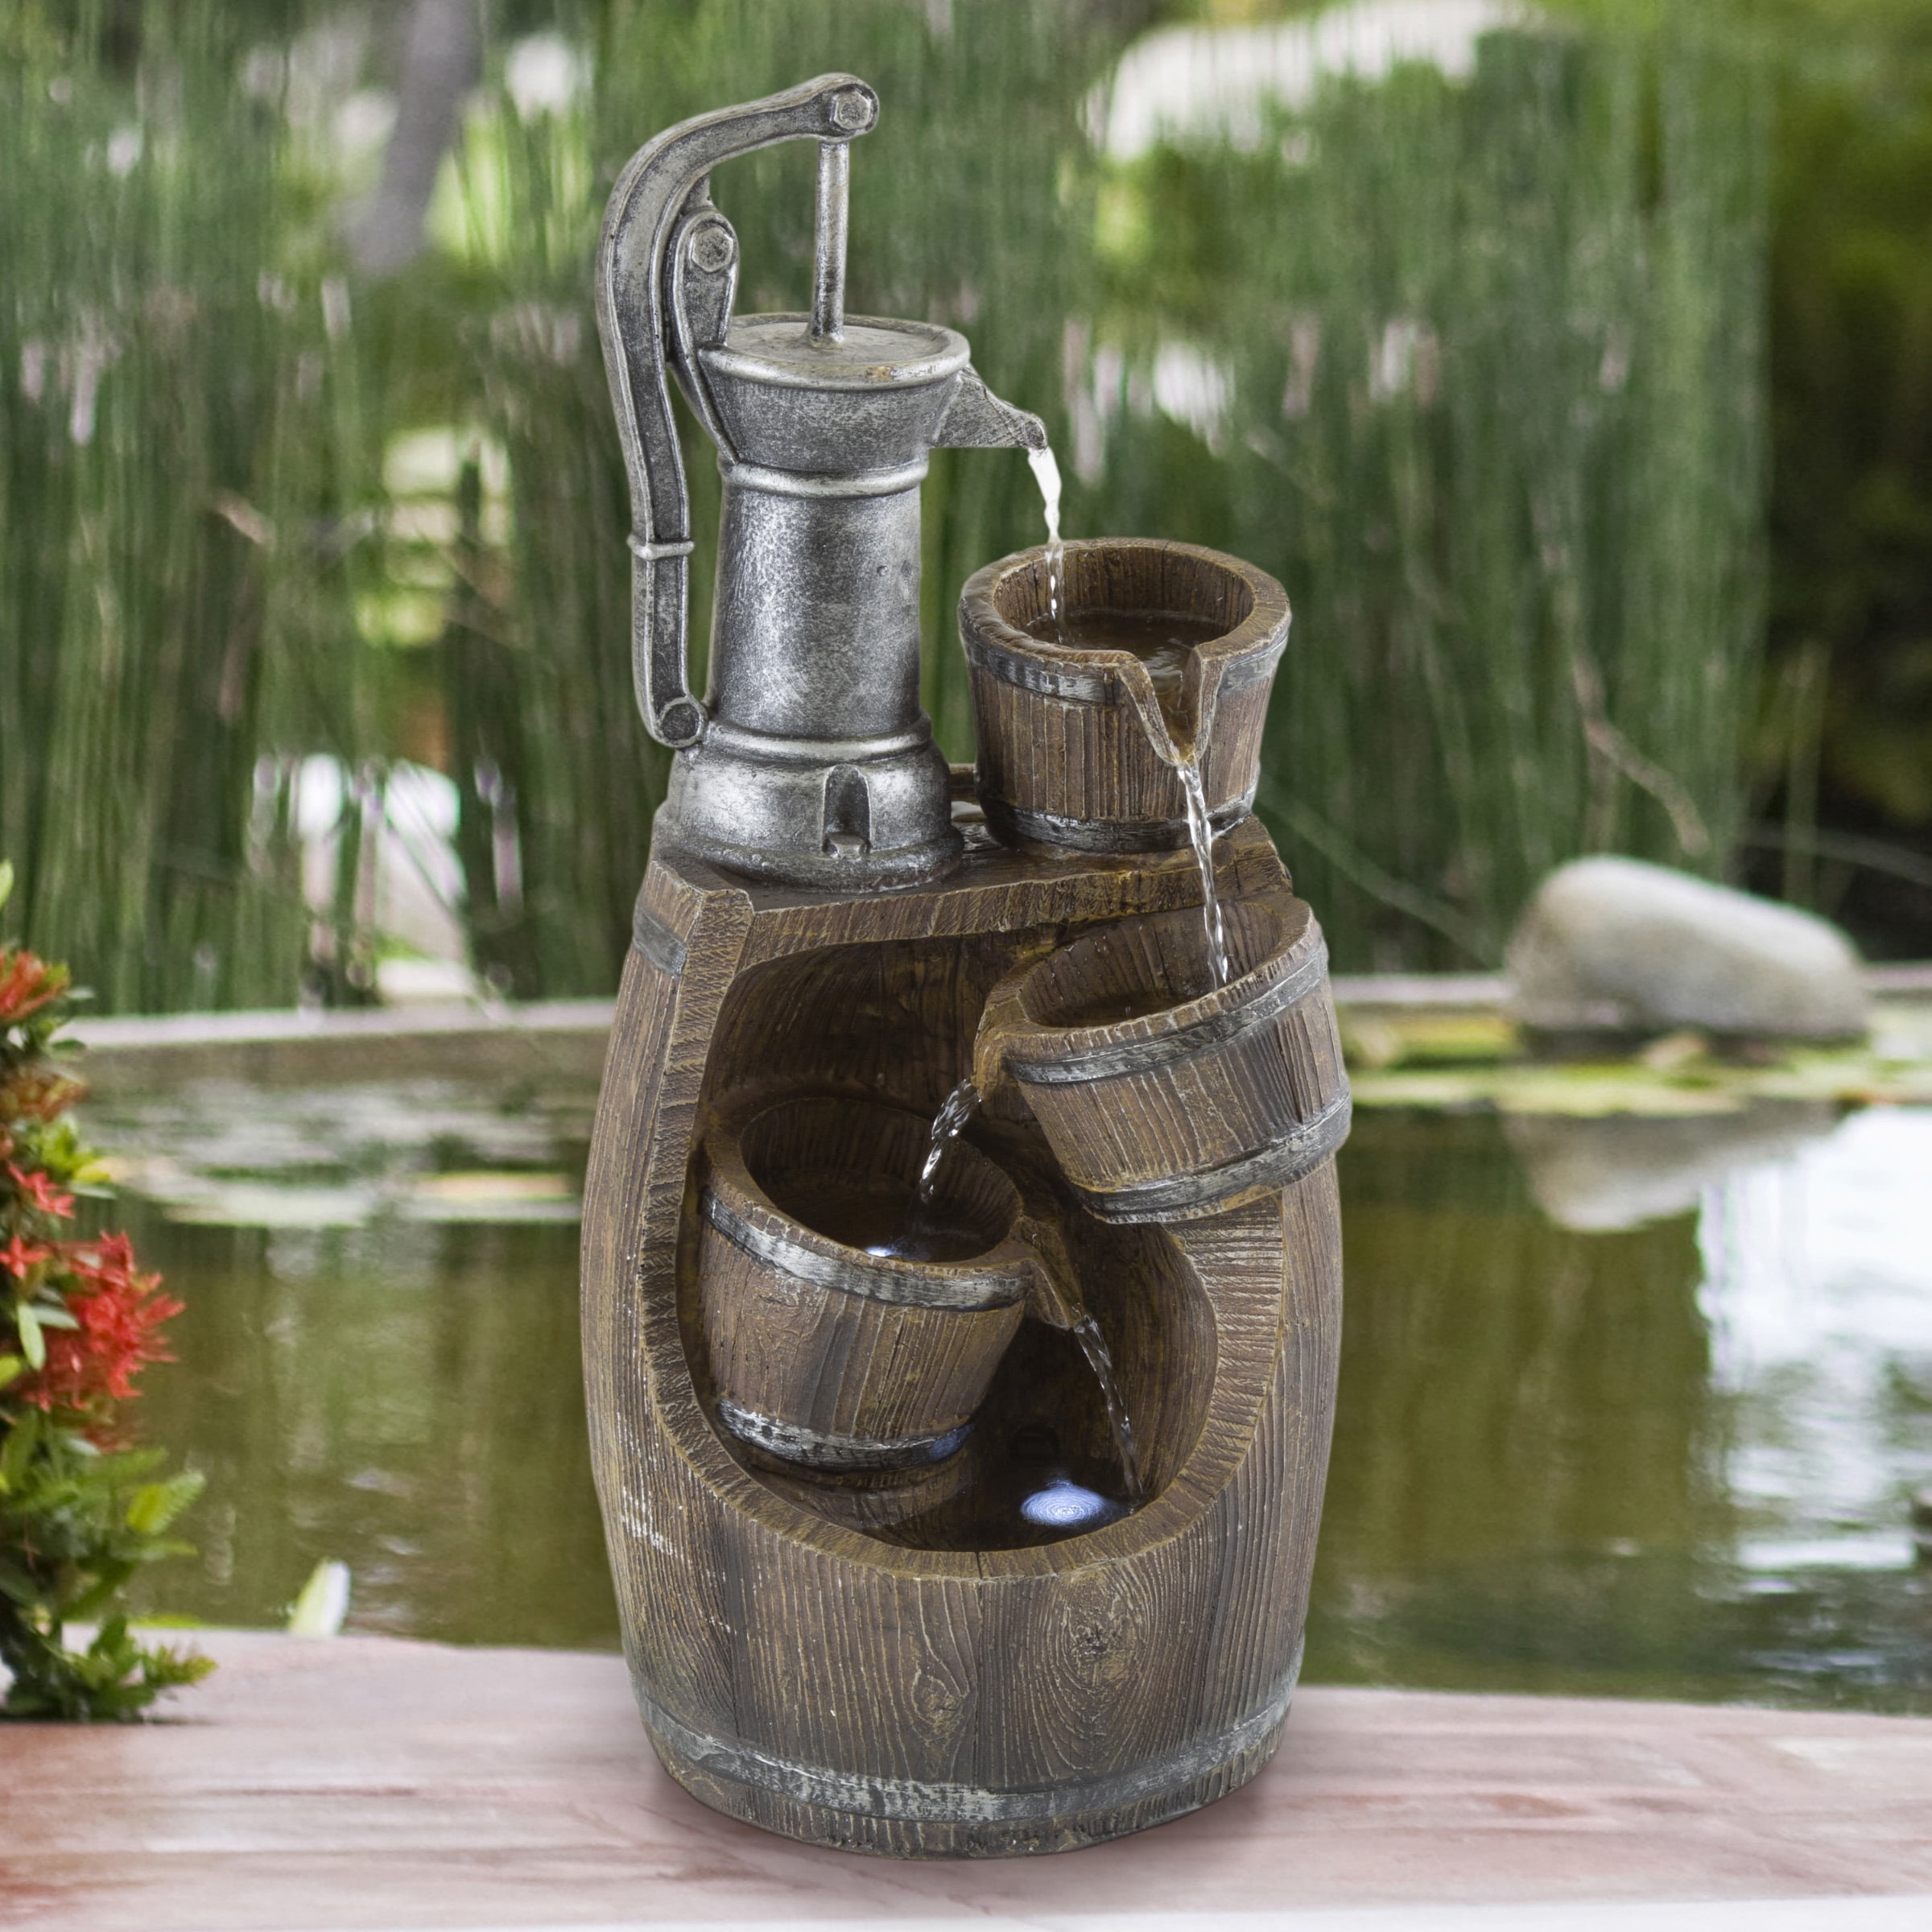 Details about   Antique Rustic Style Look Wooden Barrel Waterfall Fountain with Pump 2 Tiers Out 